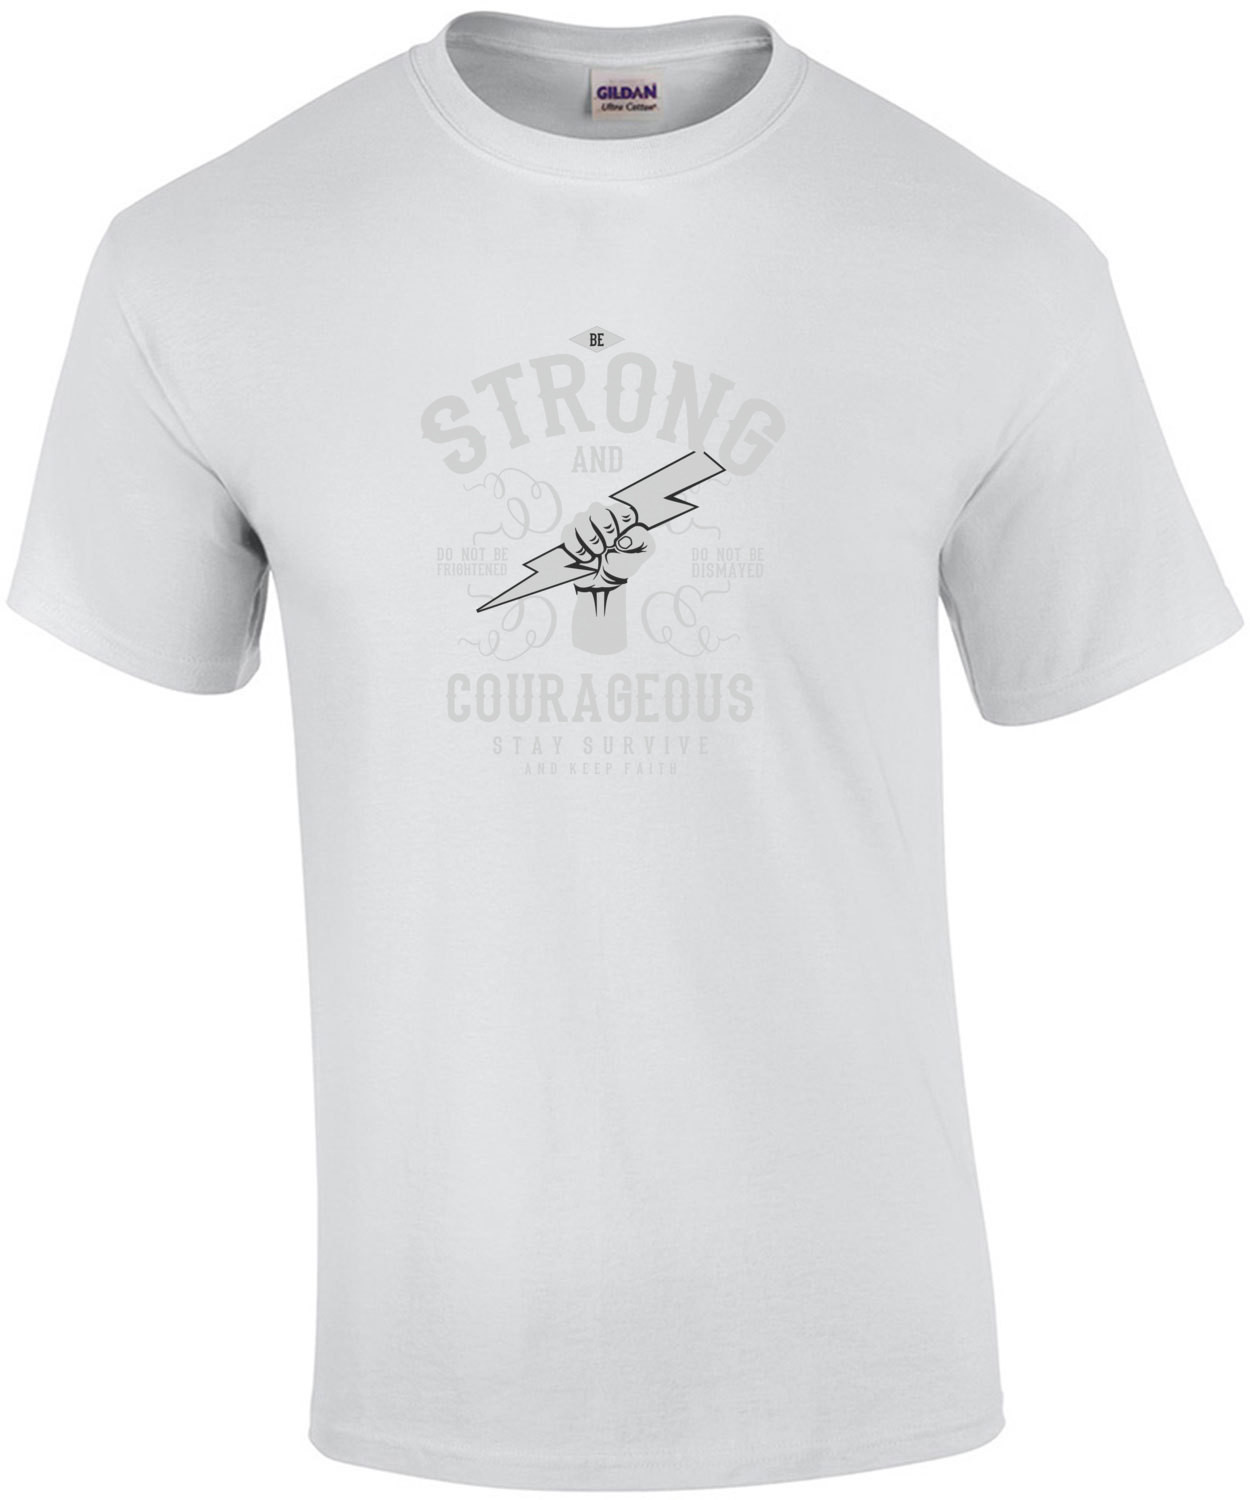 Be Strong And Courageous Motivational T-Shirt